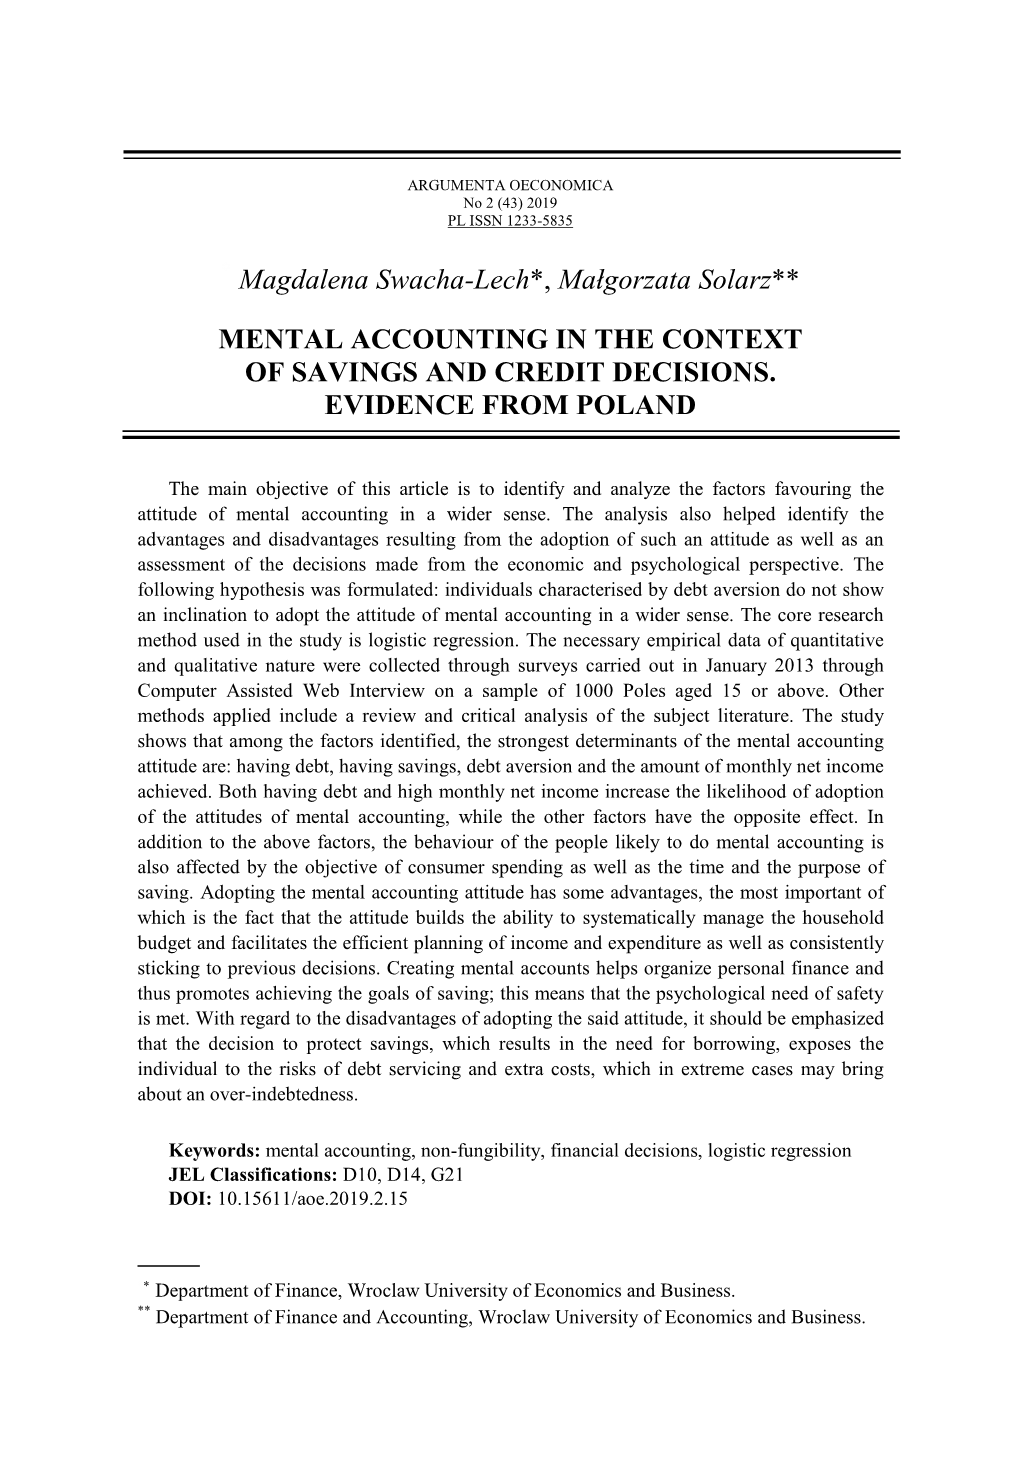 Mental Accounting in the Context of Savings and Credit Decisions